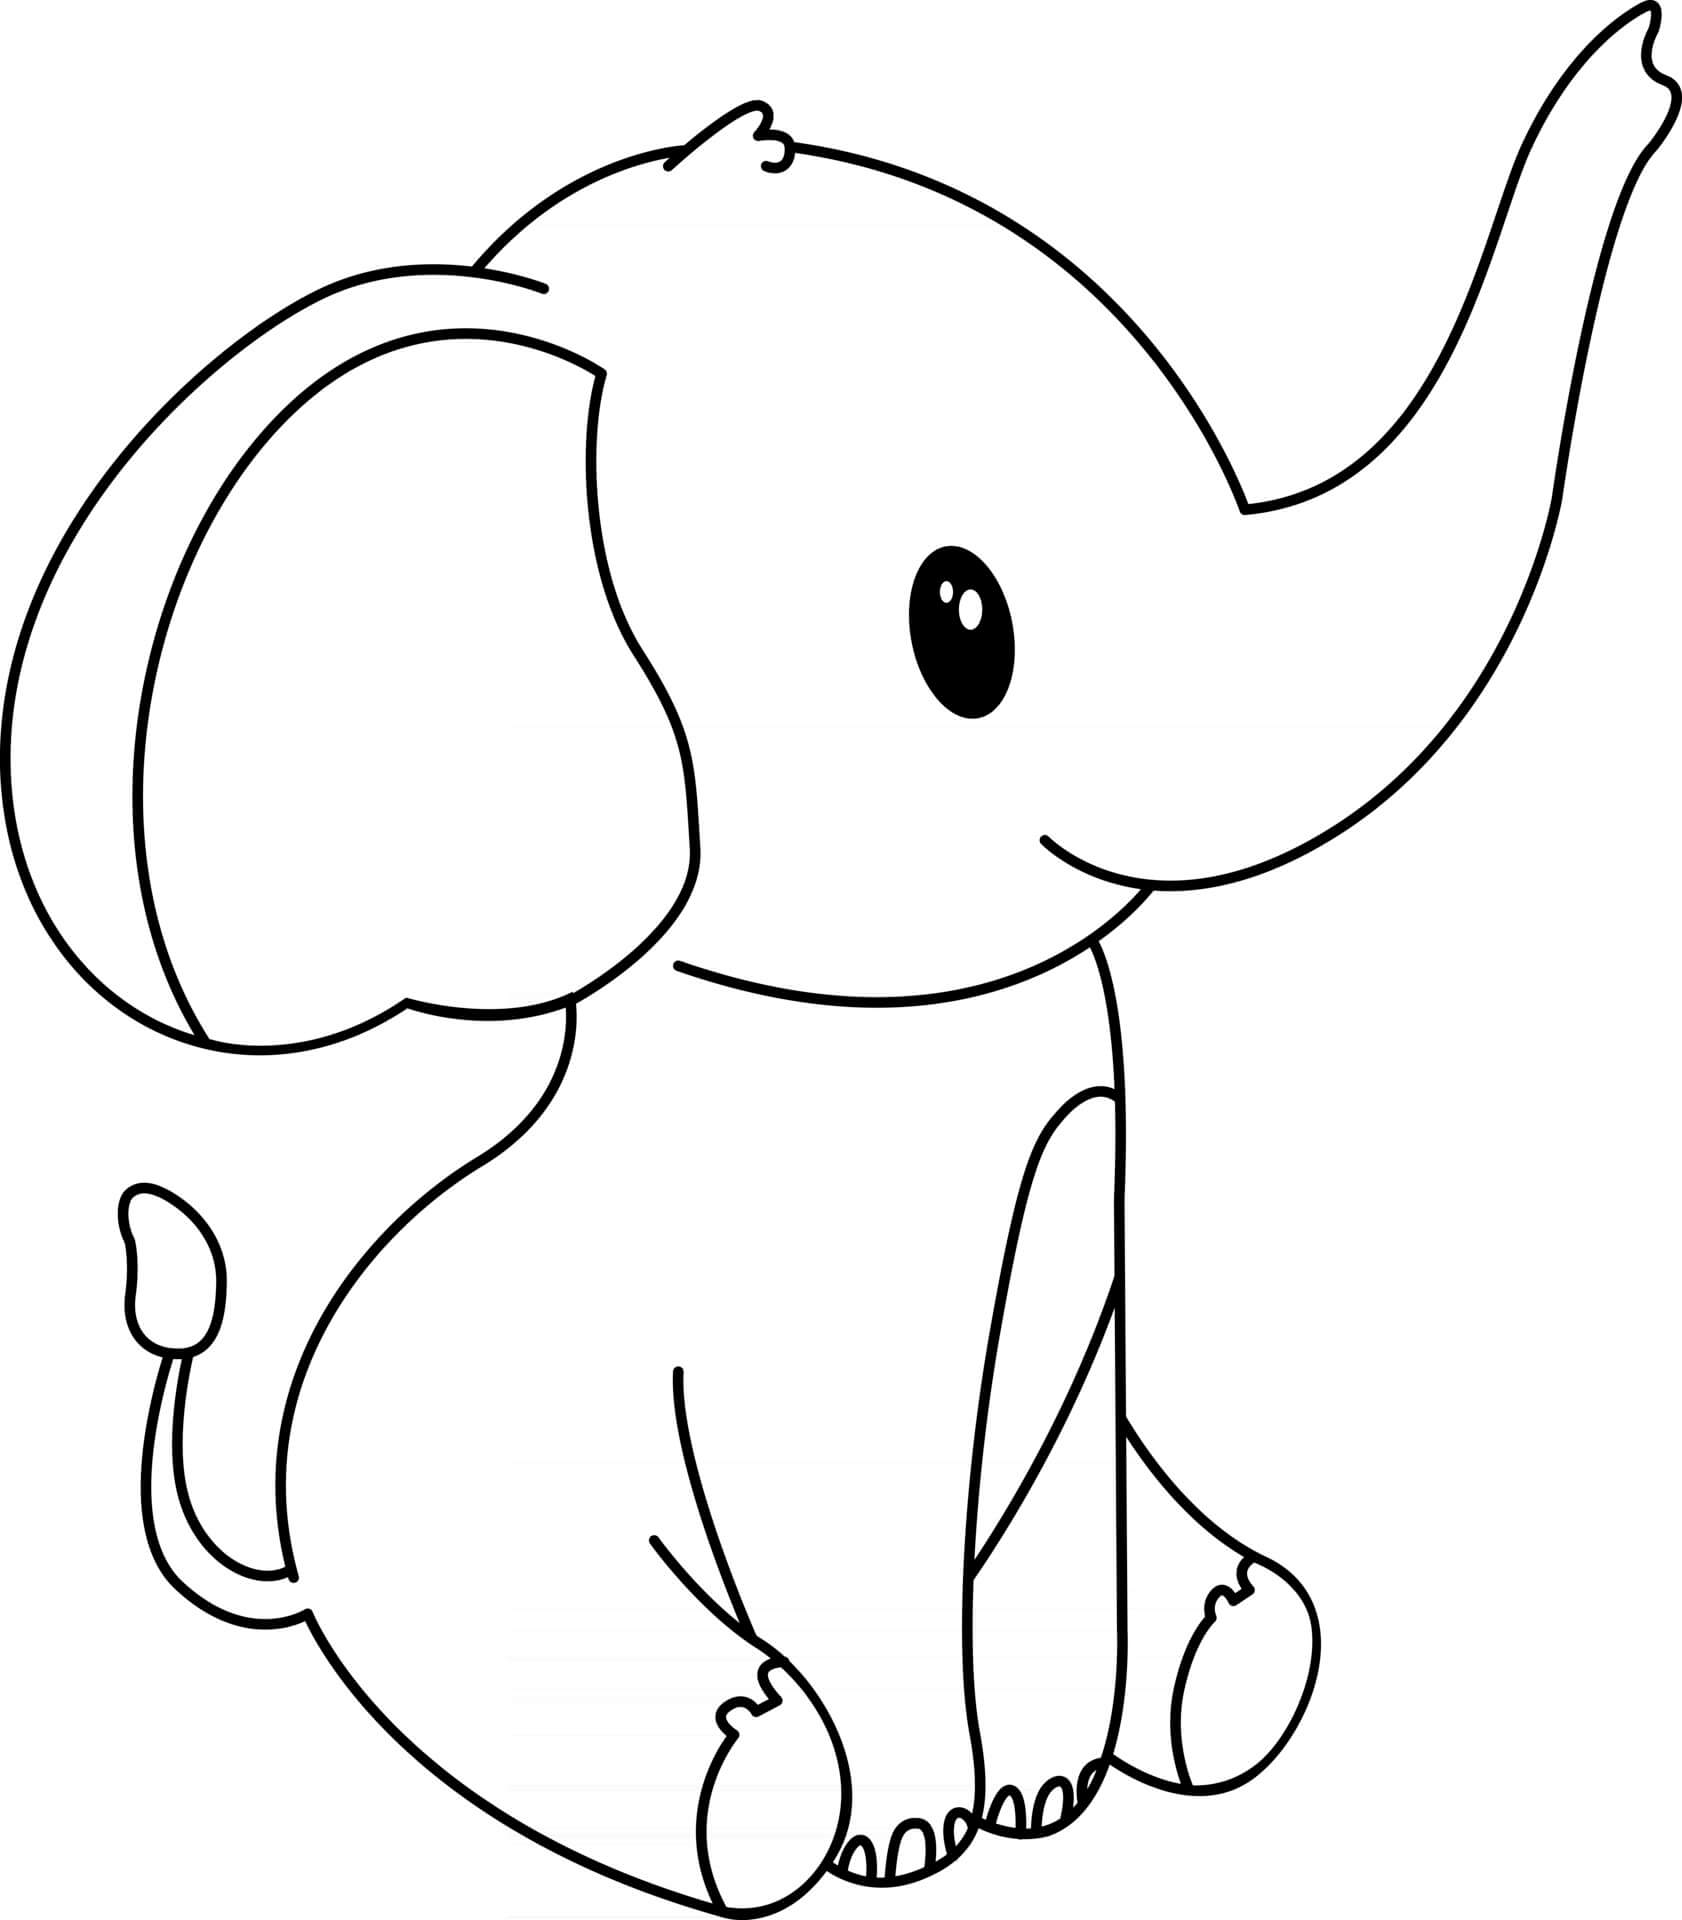 Elephant Cute Animal Coloring Pages   Coloring Cool